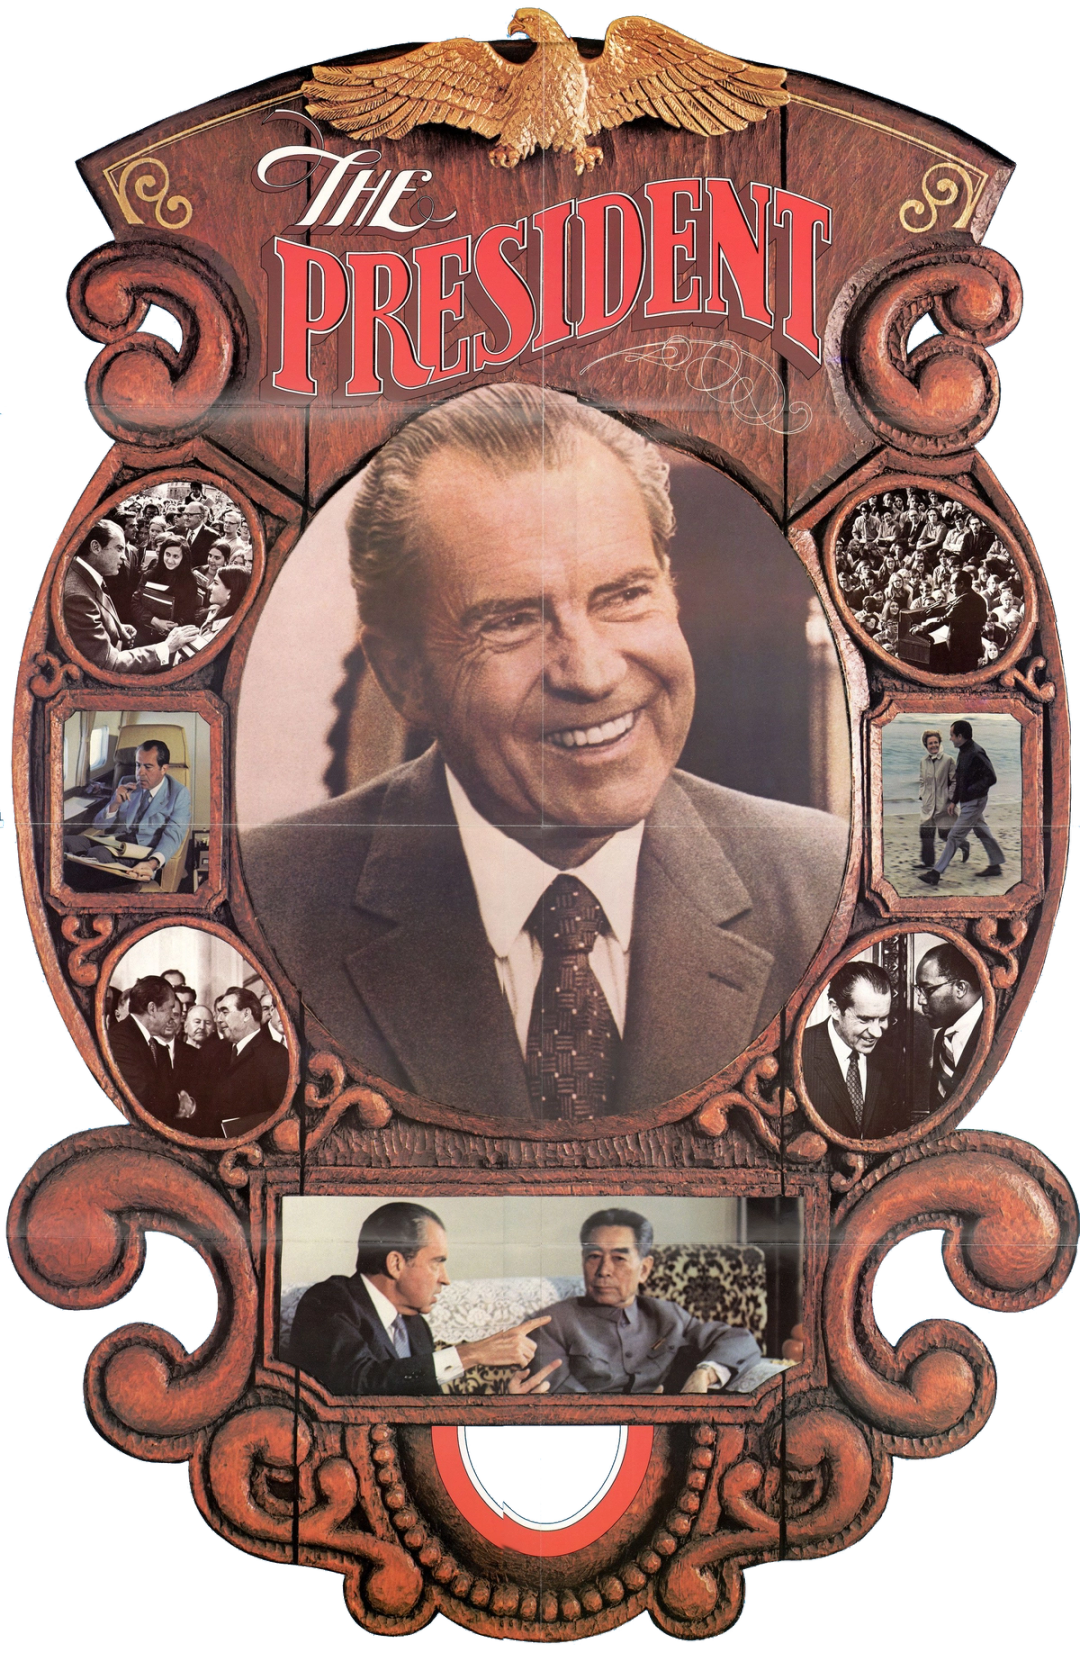 Poster for Republican President Richard M. Nixon’s reelection campaign, showing various scenes from his presidency, 1972